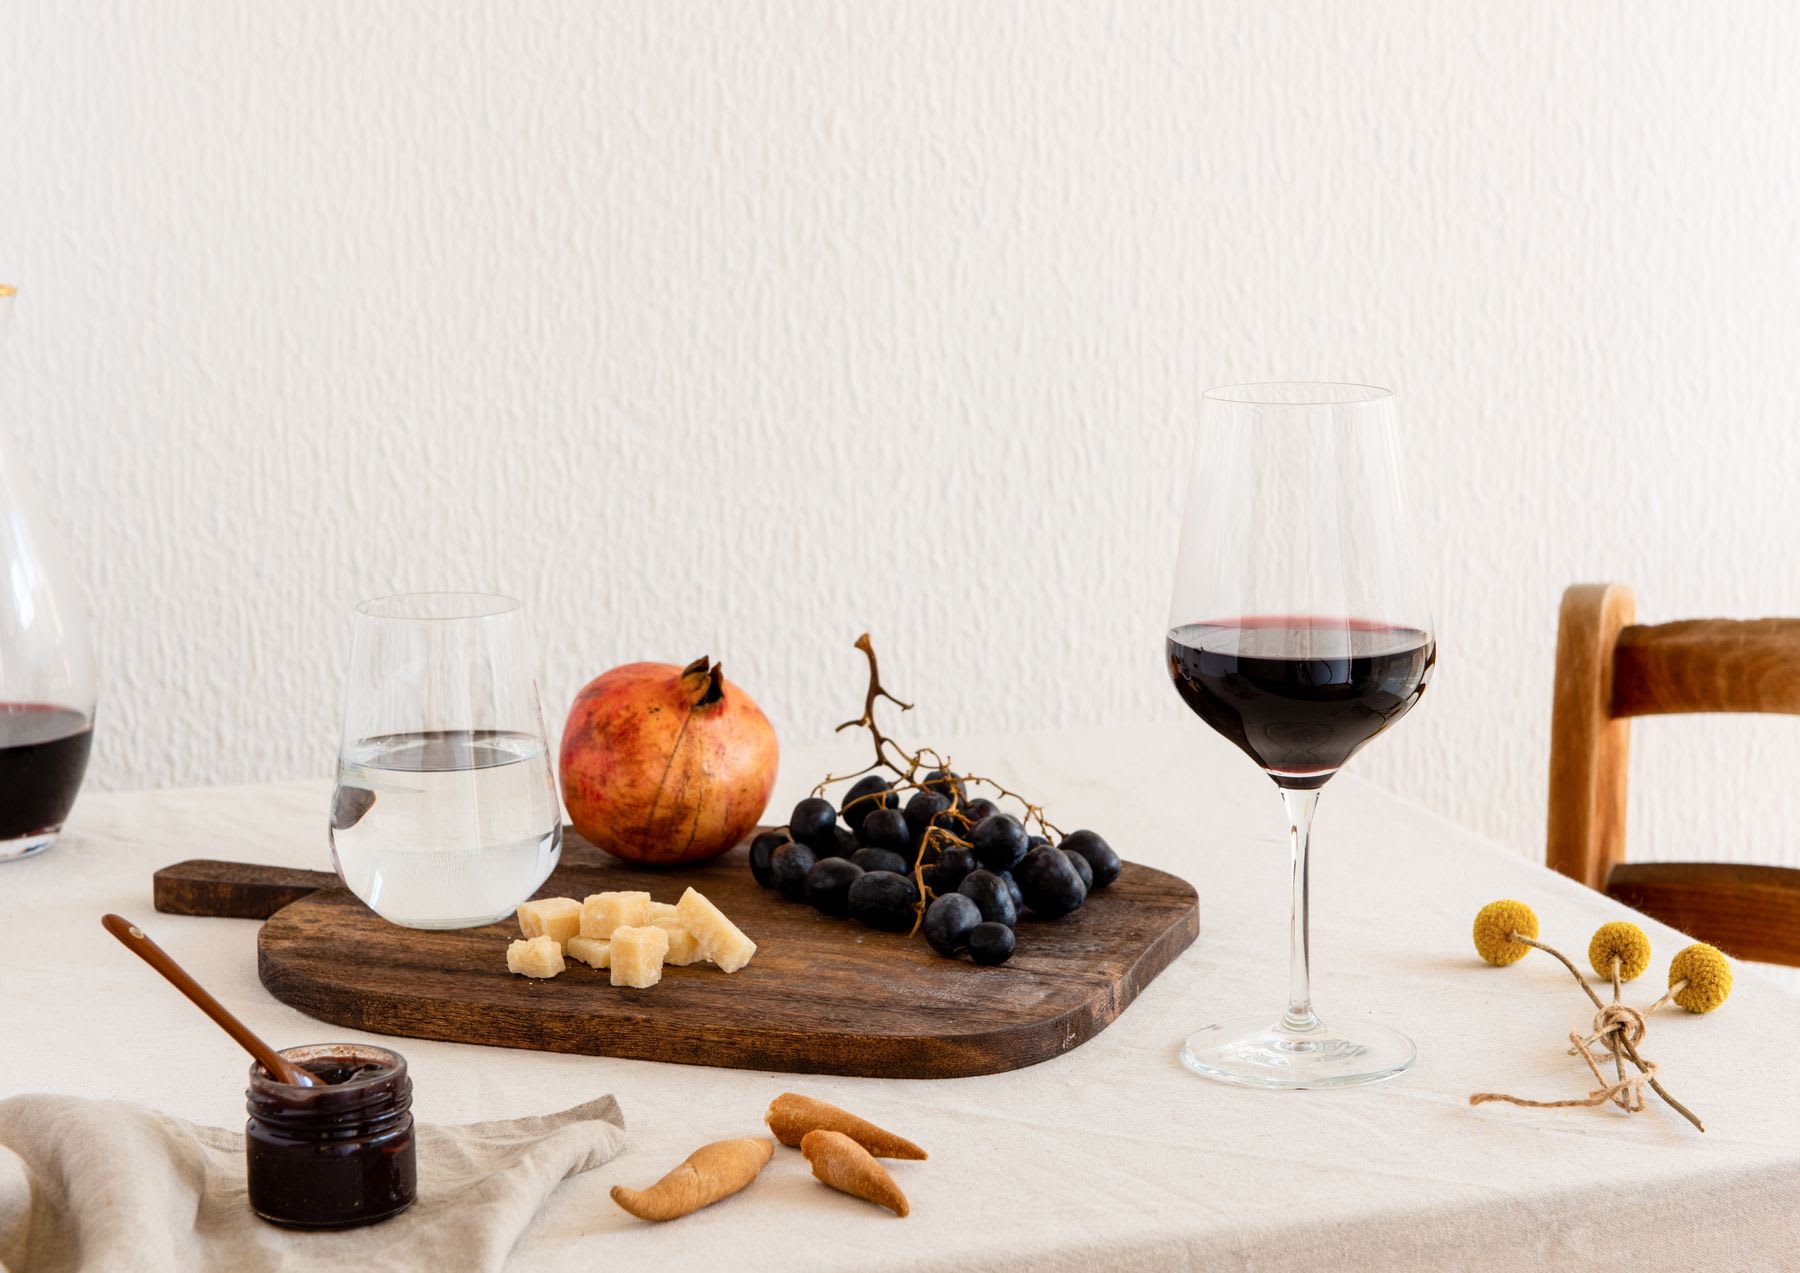 A still life of a table with wine, grapes, cheese, and a pomegranate.